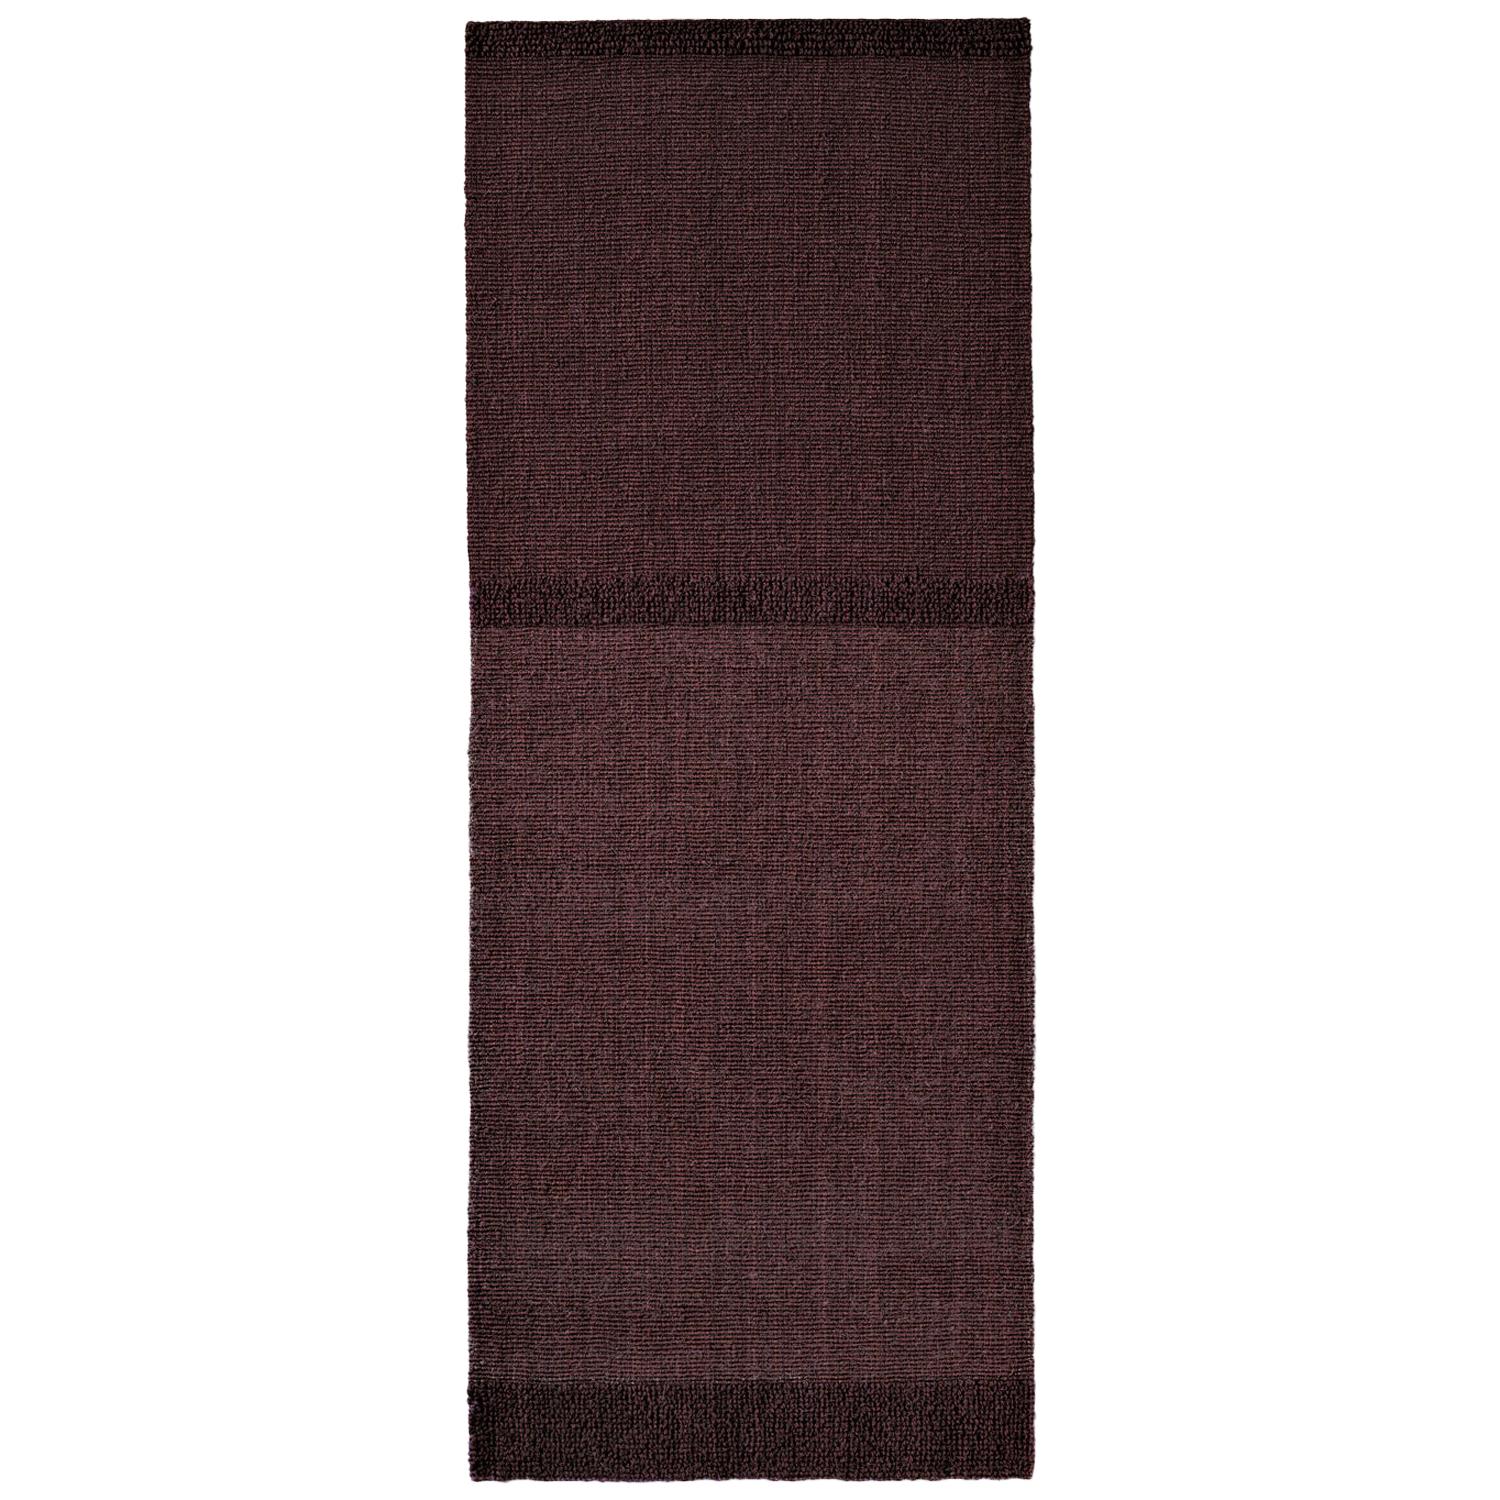 Nature Inspired Spring Coconut Brown Rug by Deanna Comellini In Stock 123x323 cm For Sale